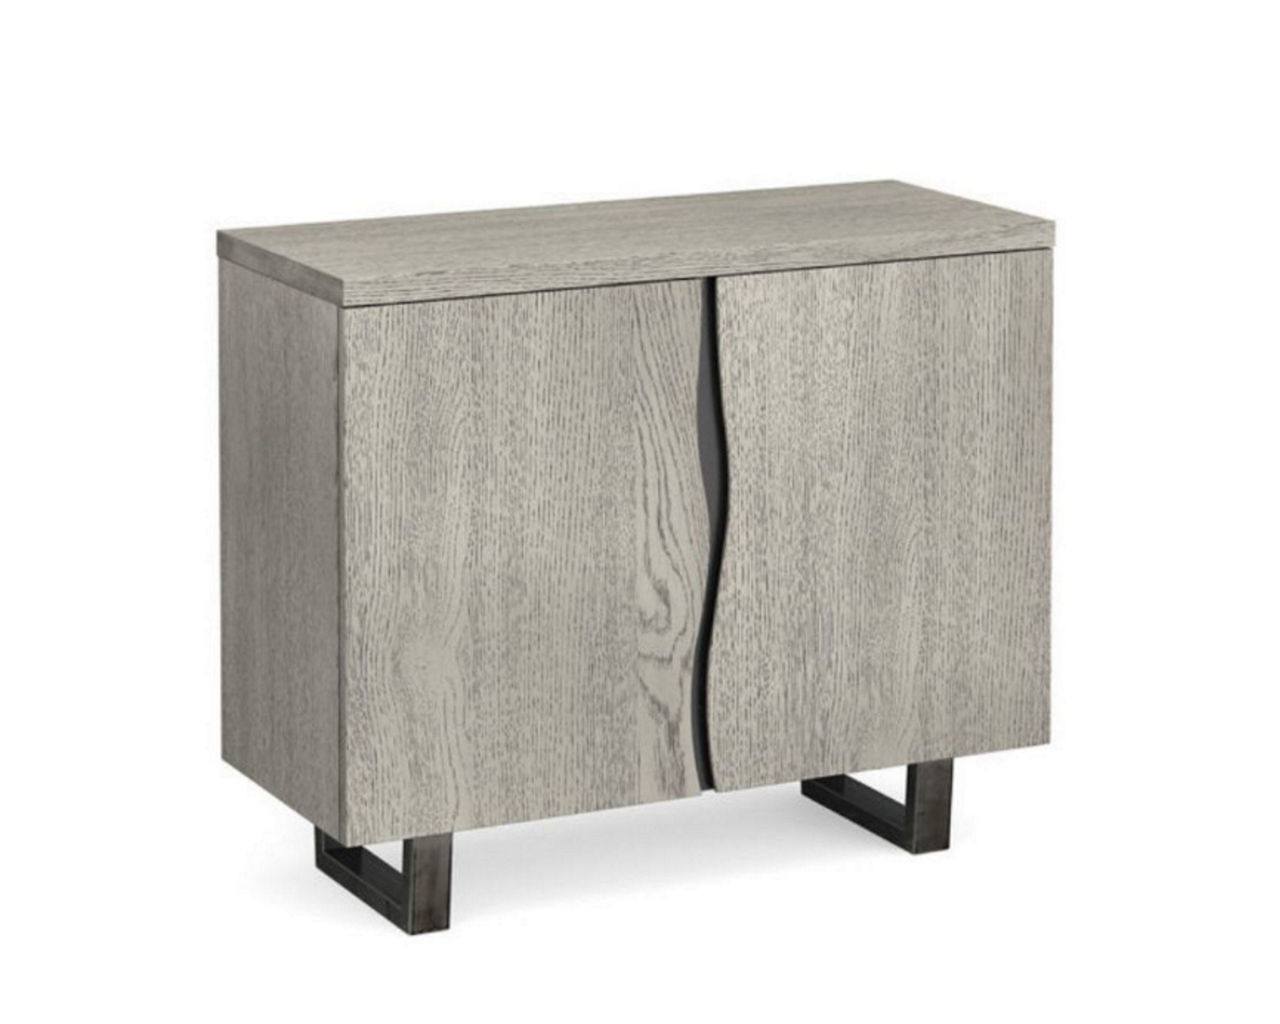 Brooklyn Living and Dining Range - Small Sideboard - 2 Doors